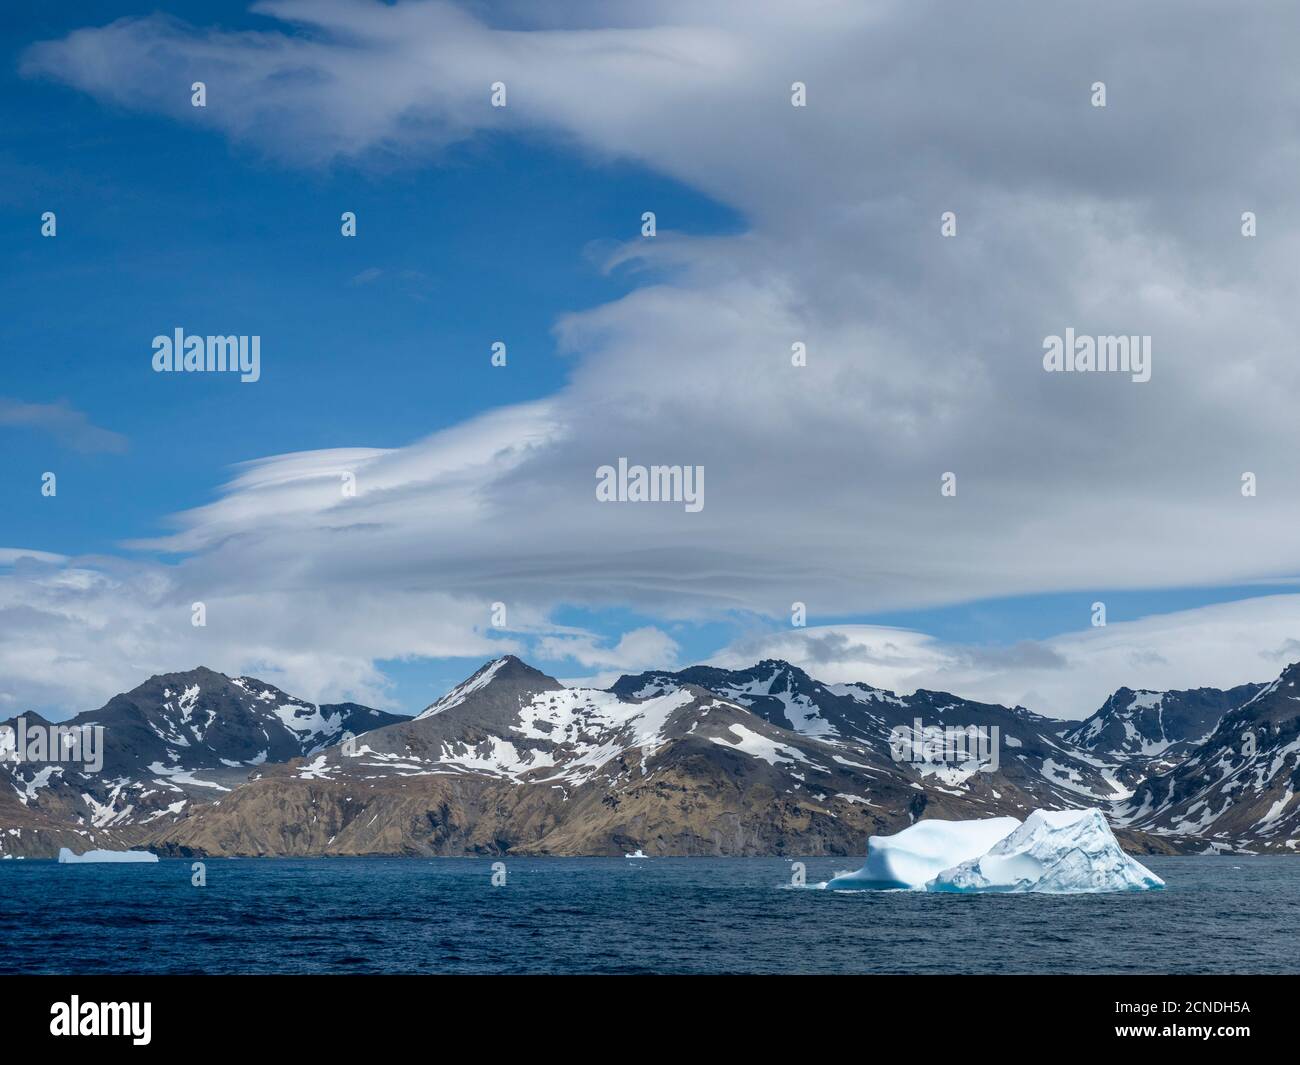 Large iceberg in the entrance of St. Andrews Bay, South Georgia, Polar Regions Stock Photo